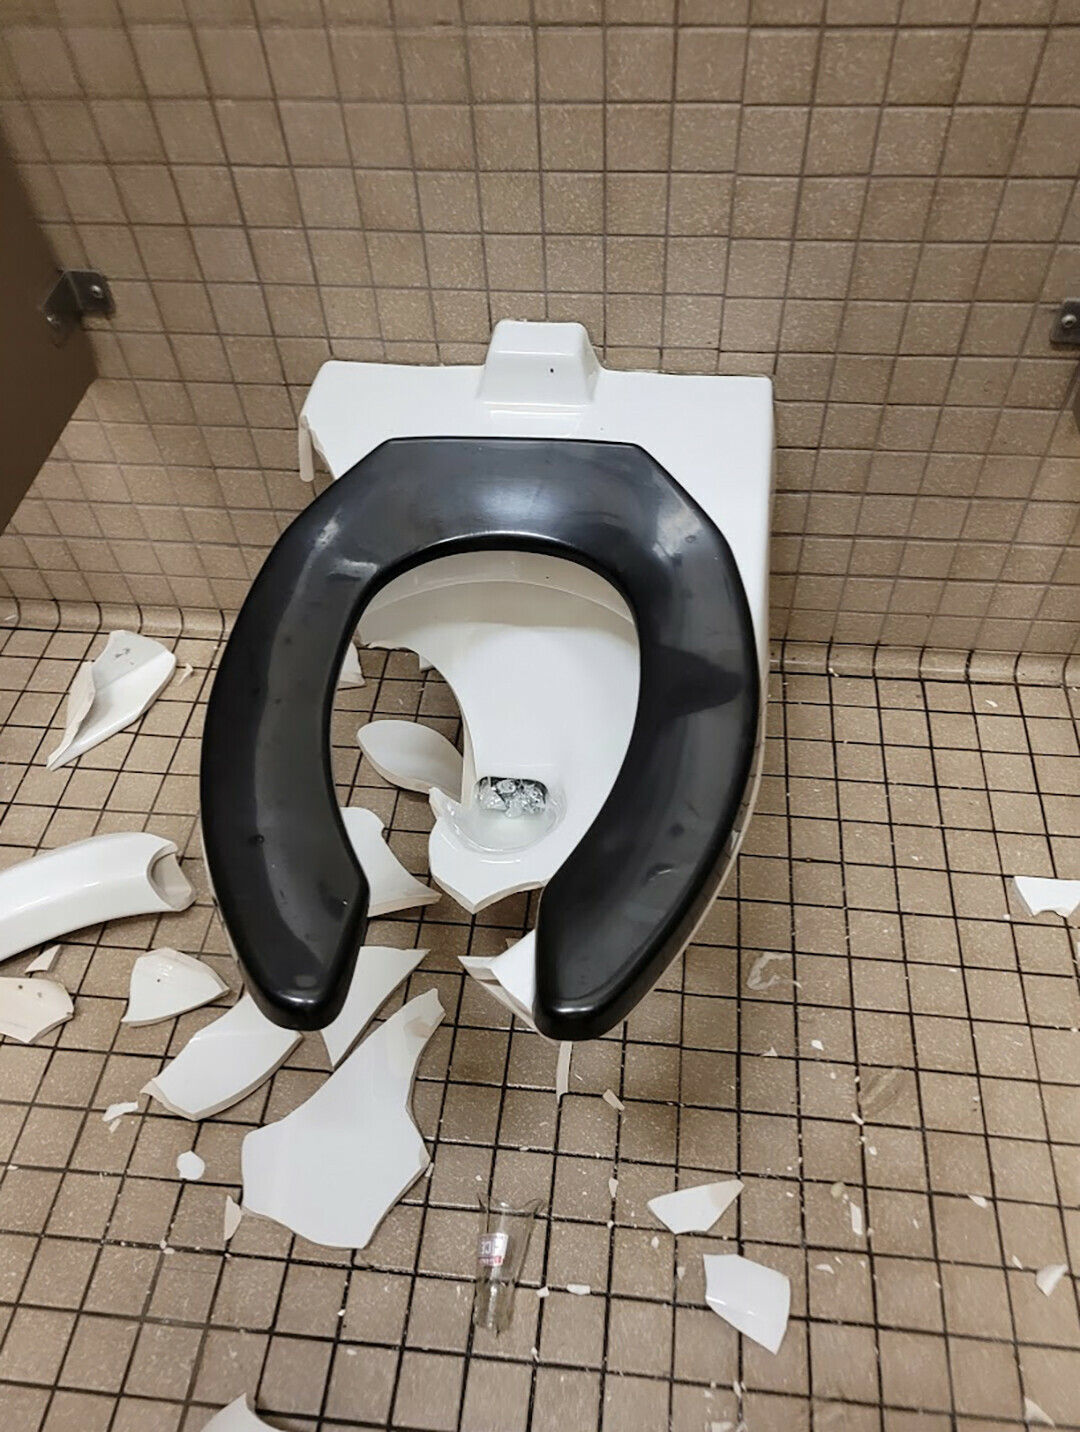 OUT OF ORDER. Vandalism at the Phoenix Park Trailhead restrooms occurred the weekend of Oct. 1-2. (Submitted photo)